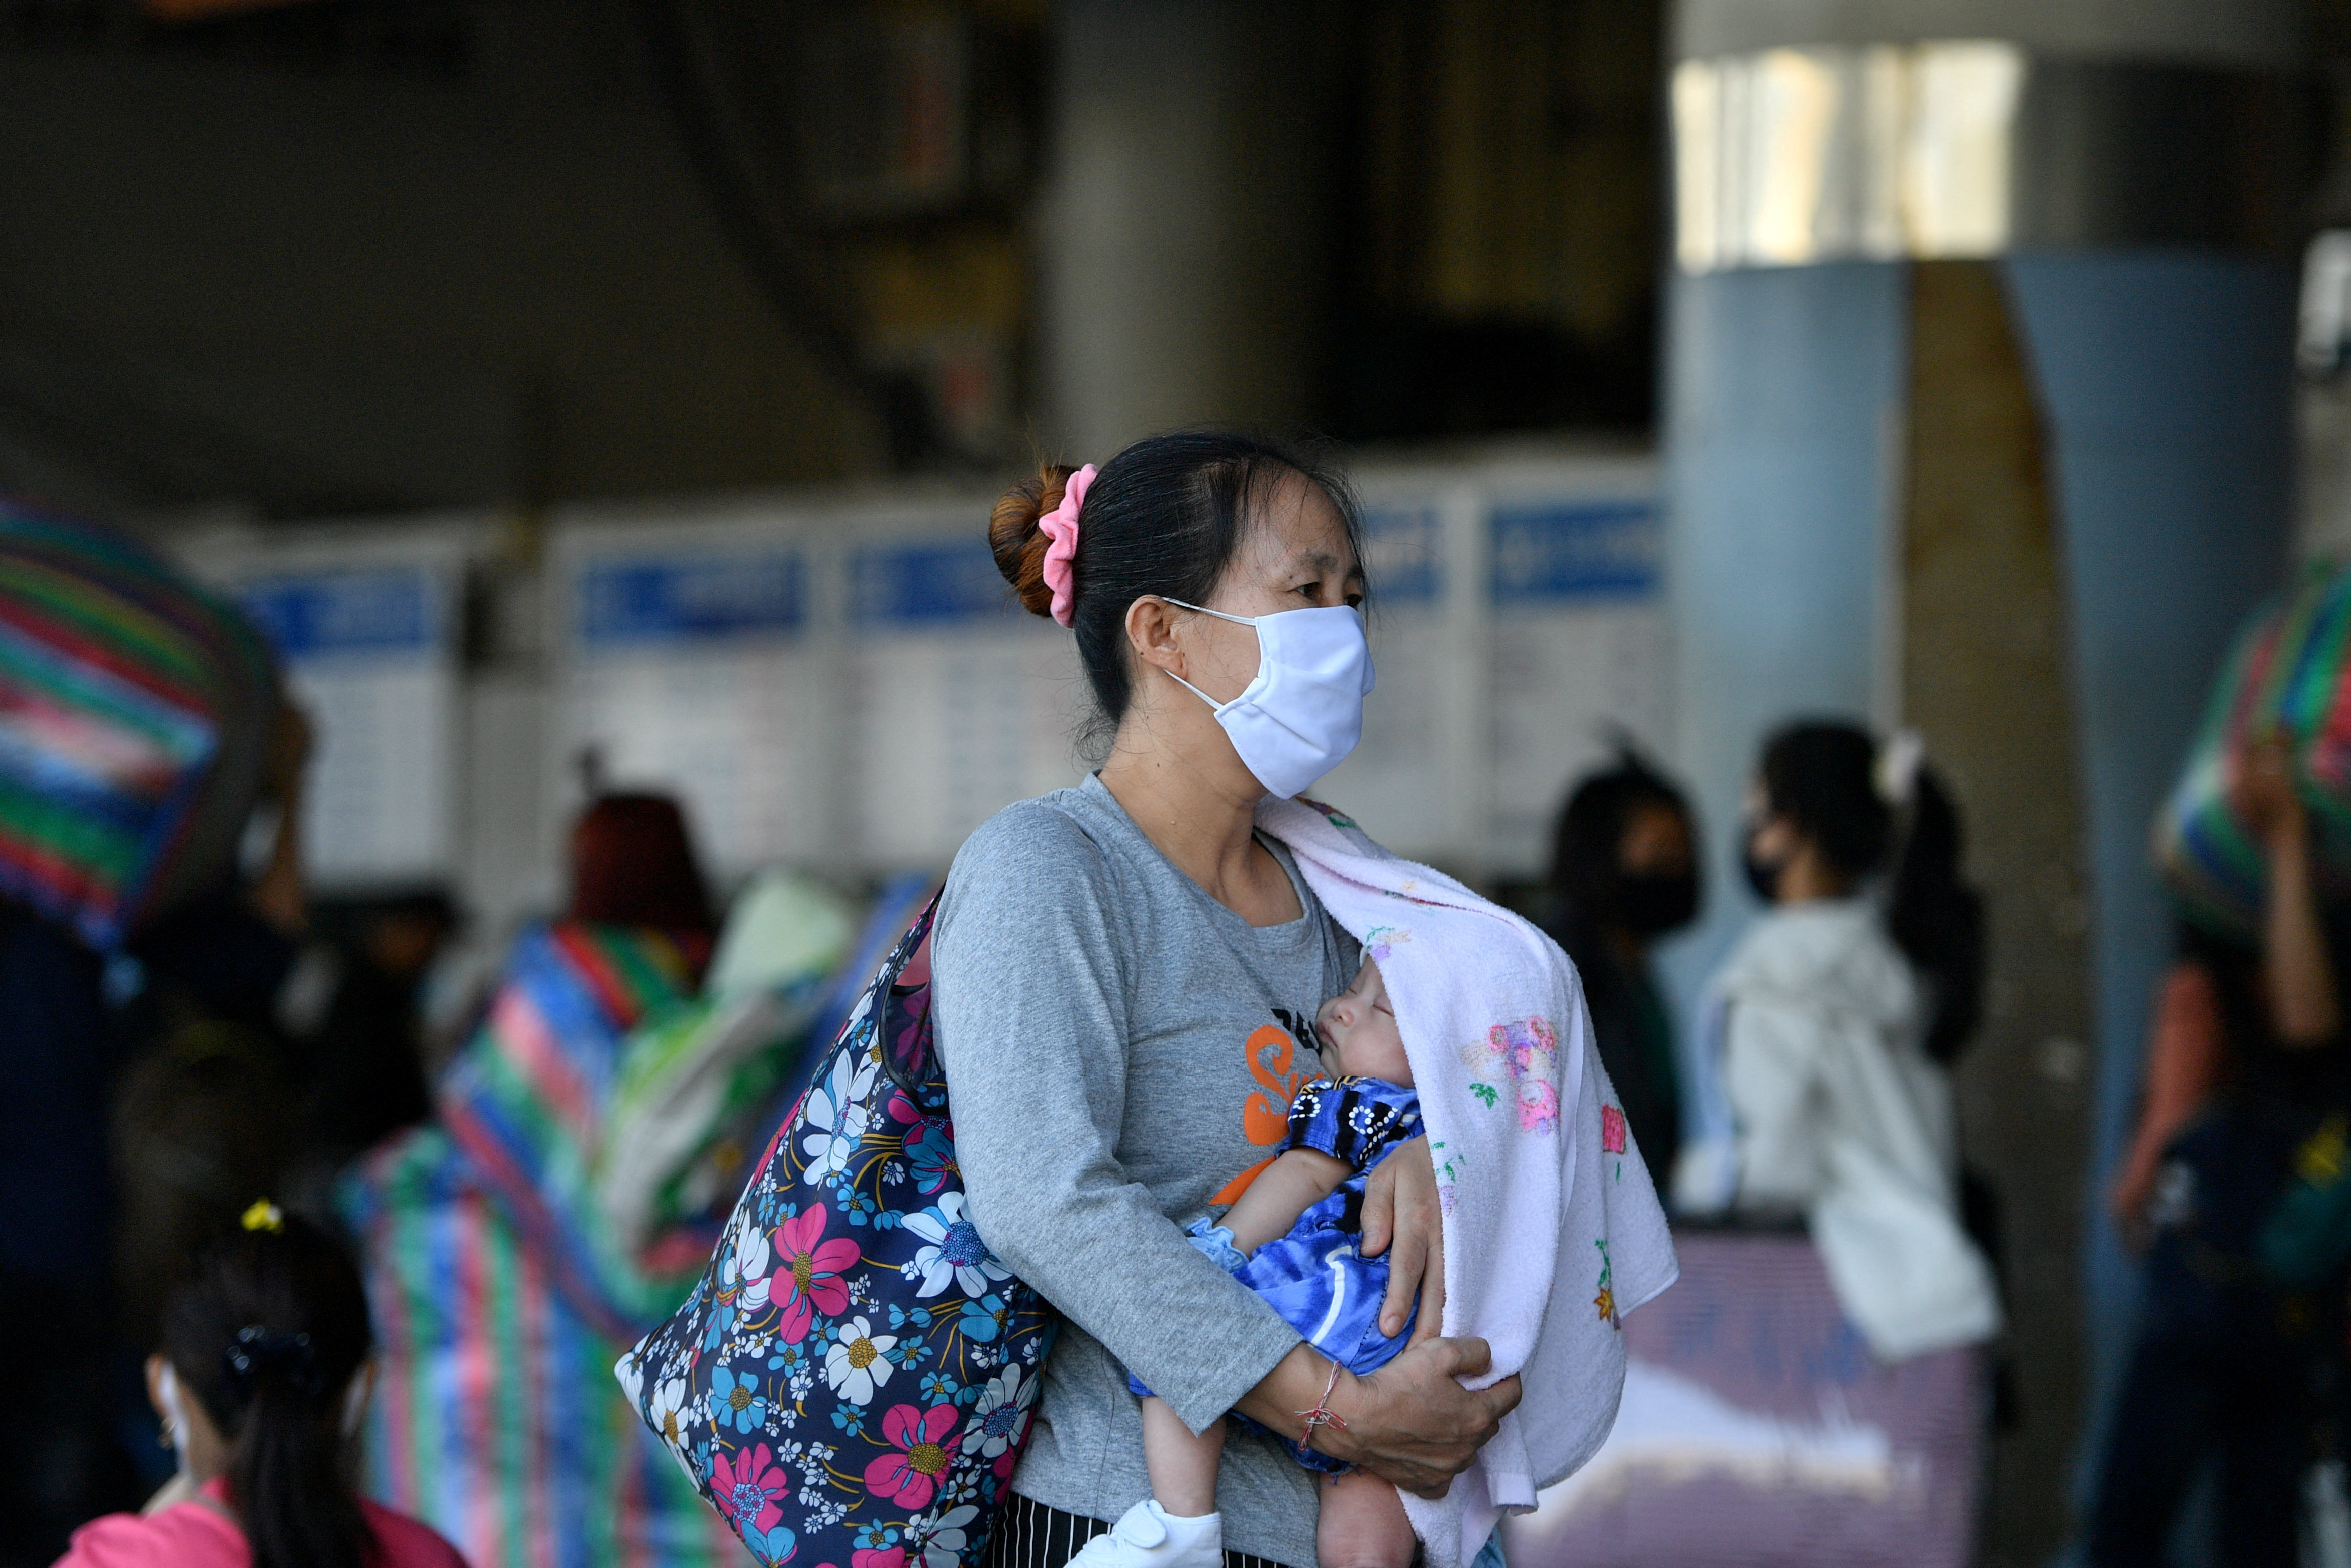 A woman wearing a mask carries a baby at a bus station during the coronavirus disease (COVID-19) outbreak, in Bangkok